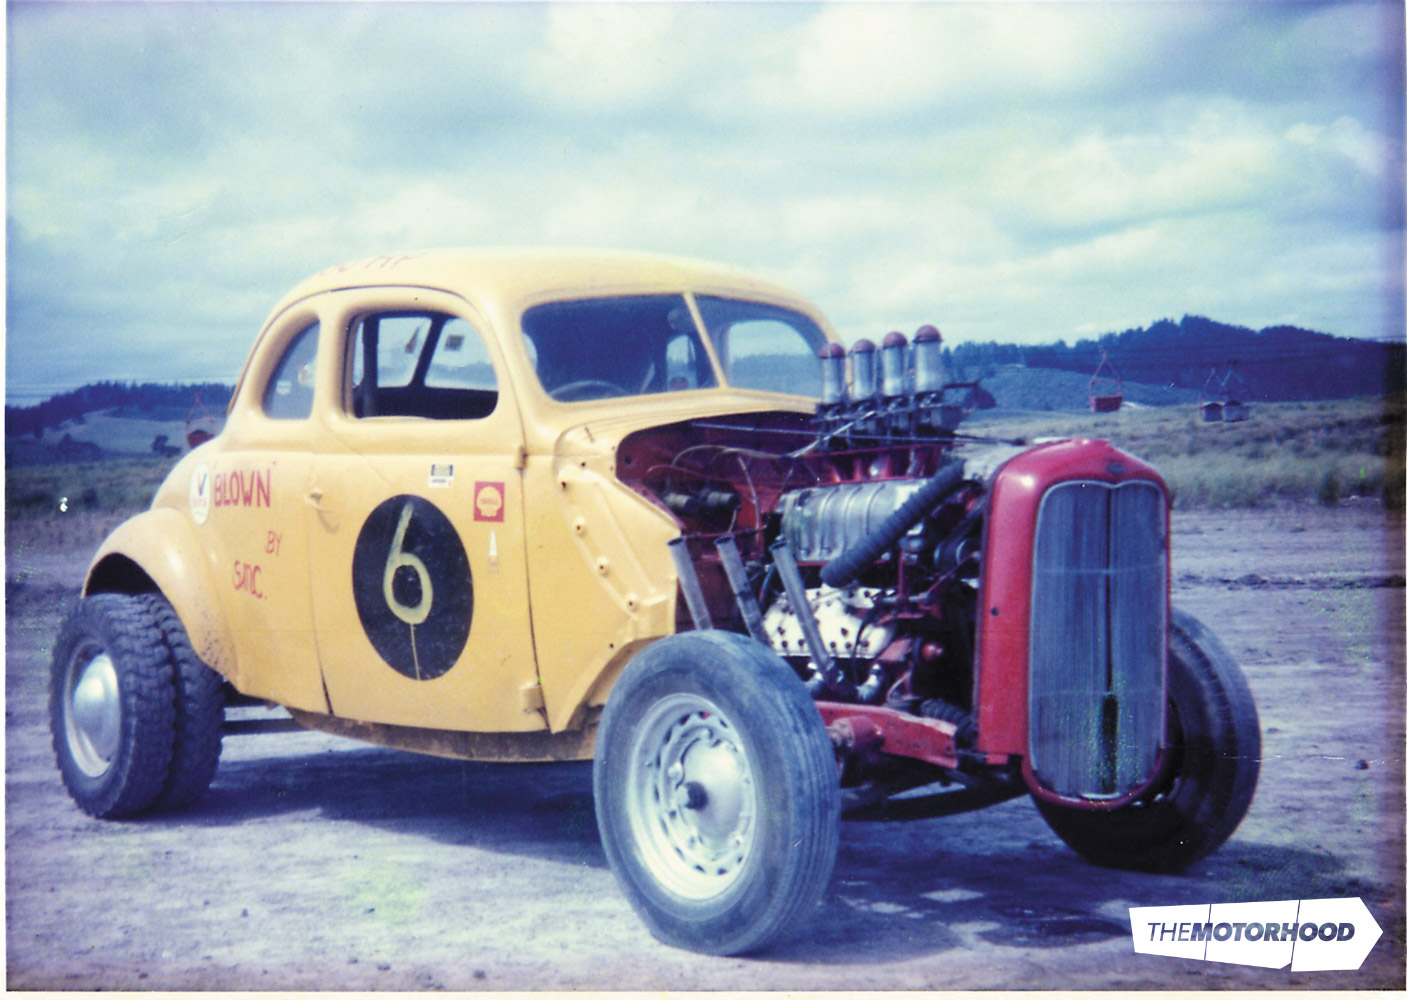 A serious piece of kit — Peter's '37 coupe with GMC blower and dual tyres on the rear. Pictured here at Kopuku where he set the fastest time at the first official New Zealand drag racing meet, 1966 (Photo: Peter Lodge collection)